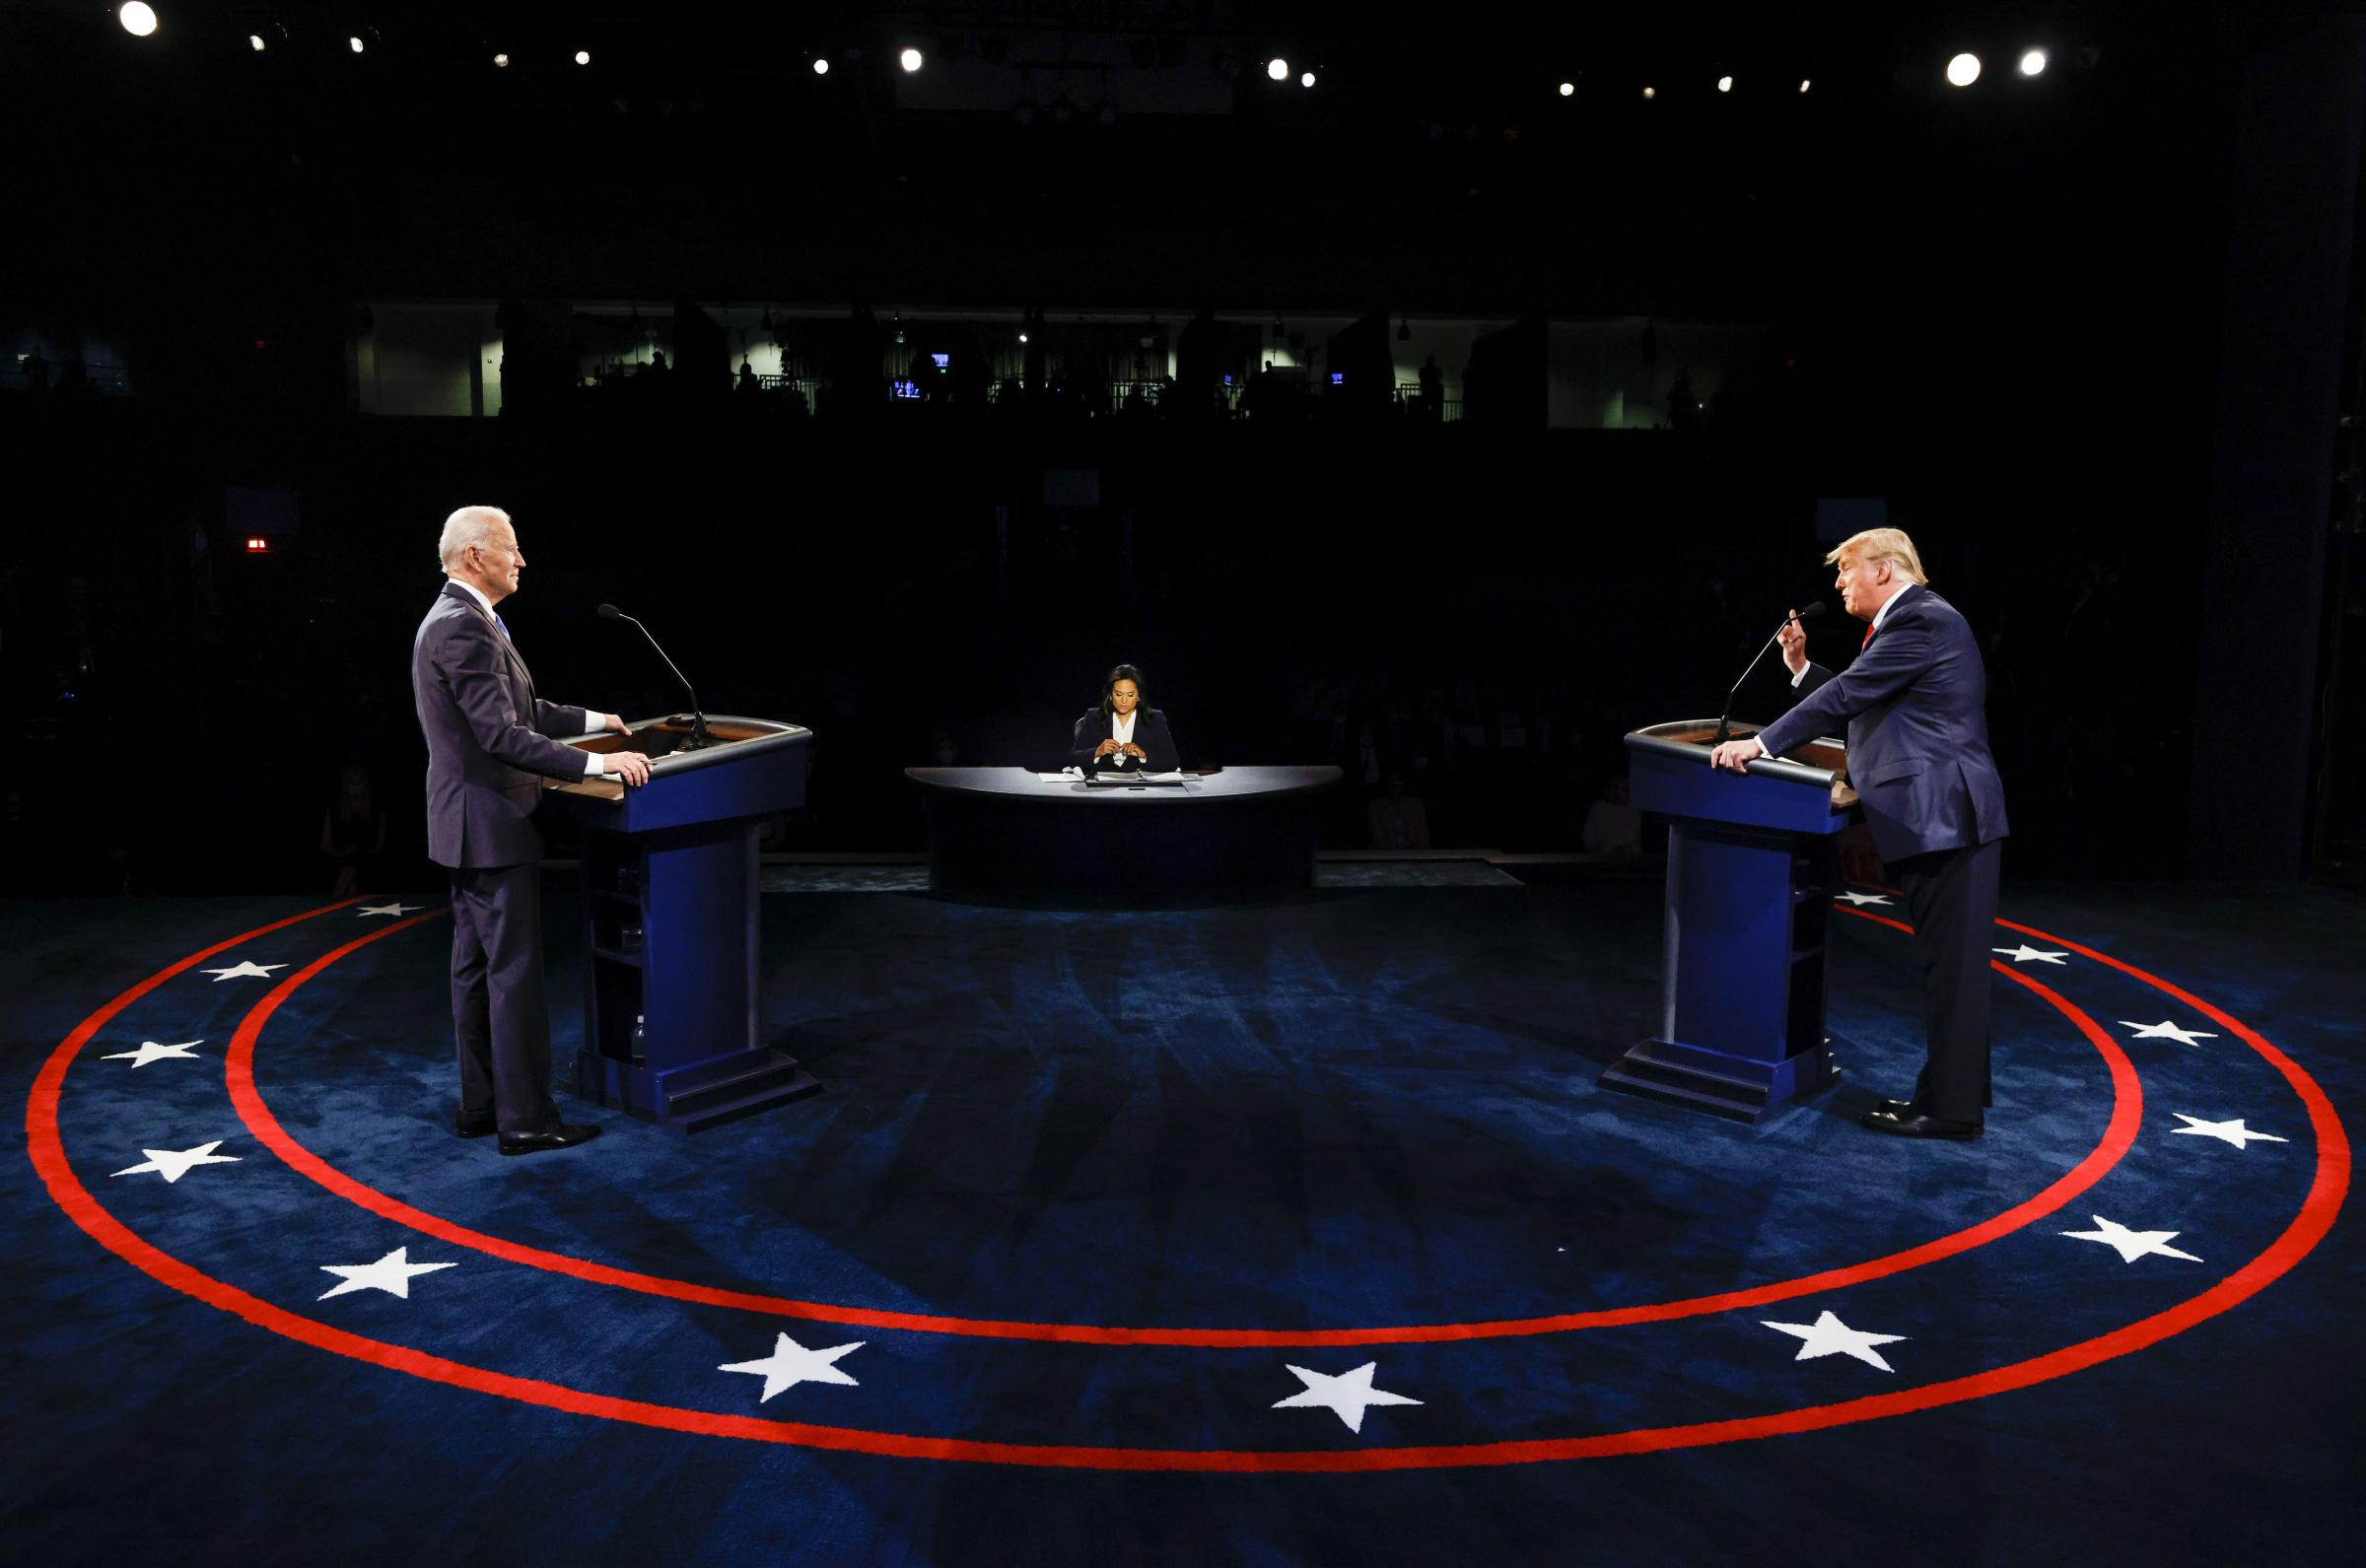 NASHVILLE, TENNESSEE - OCTOBER 22: U.S. President Donald Trump and Democratic presidential nominee Joe Biden participate in the final presidential debate at Belmont University on October 22, 2020 in Nashville, Tennessee. This is the last debate between